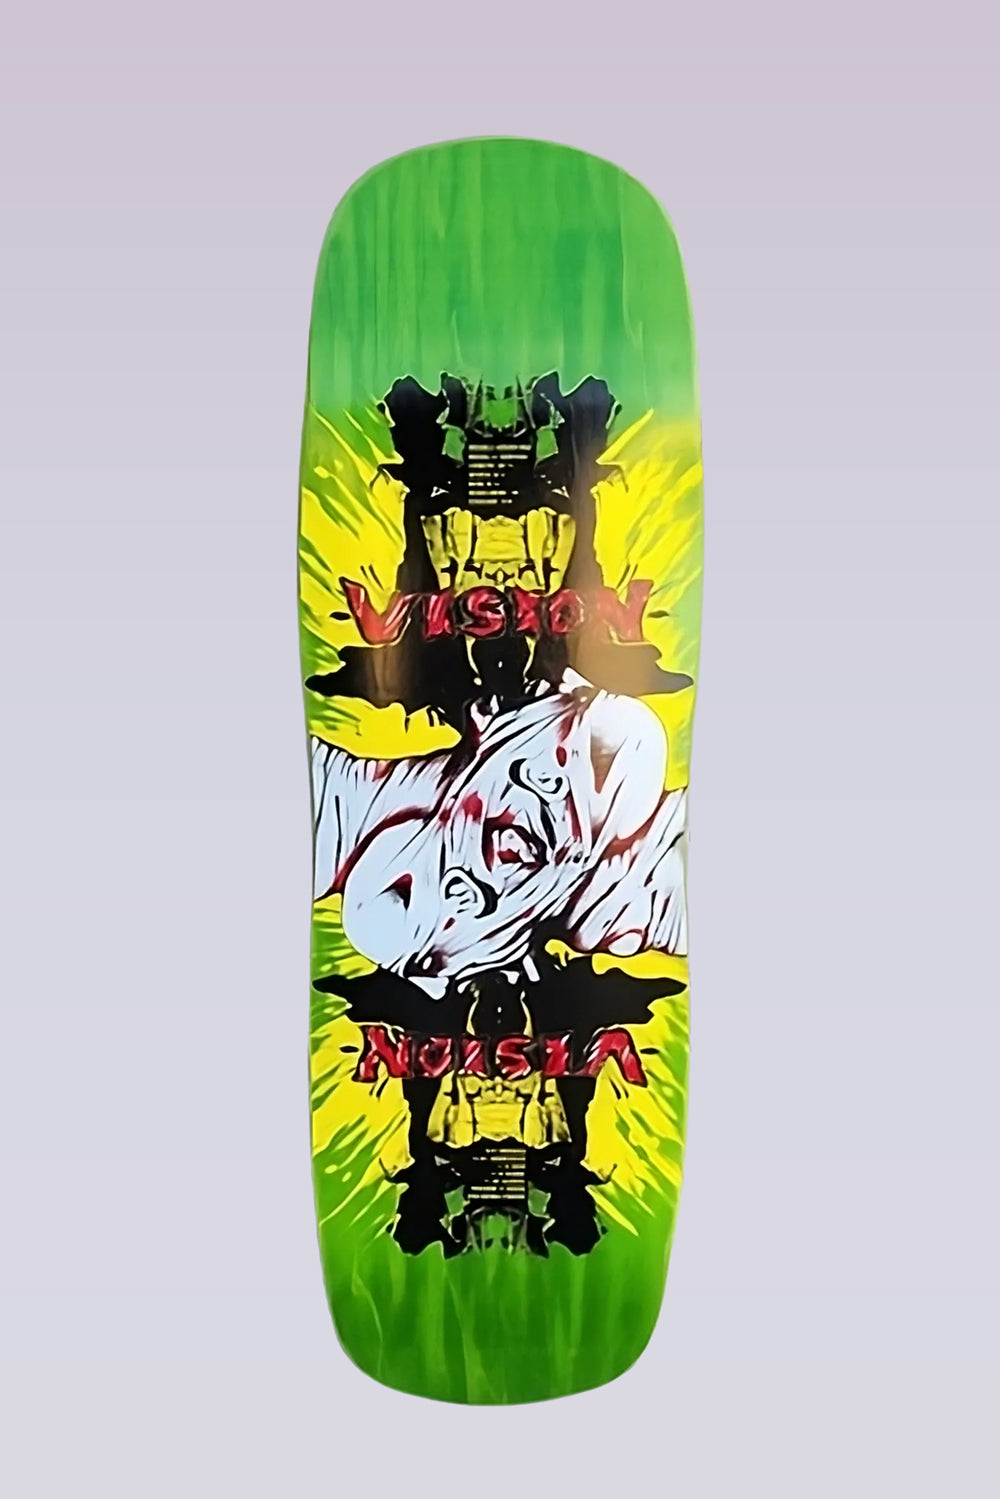 Double Vision Skateboard Deck - 9.5"X32.5" - Lime Stain